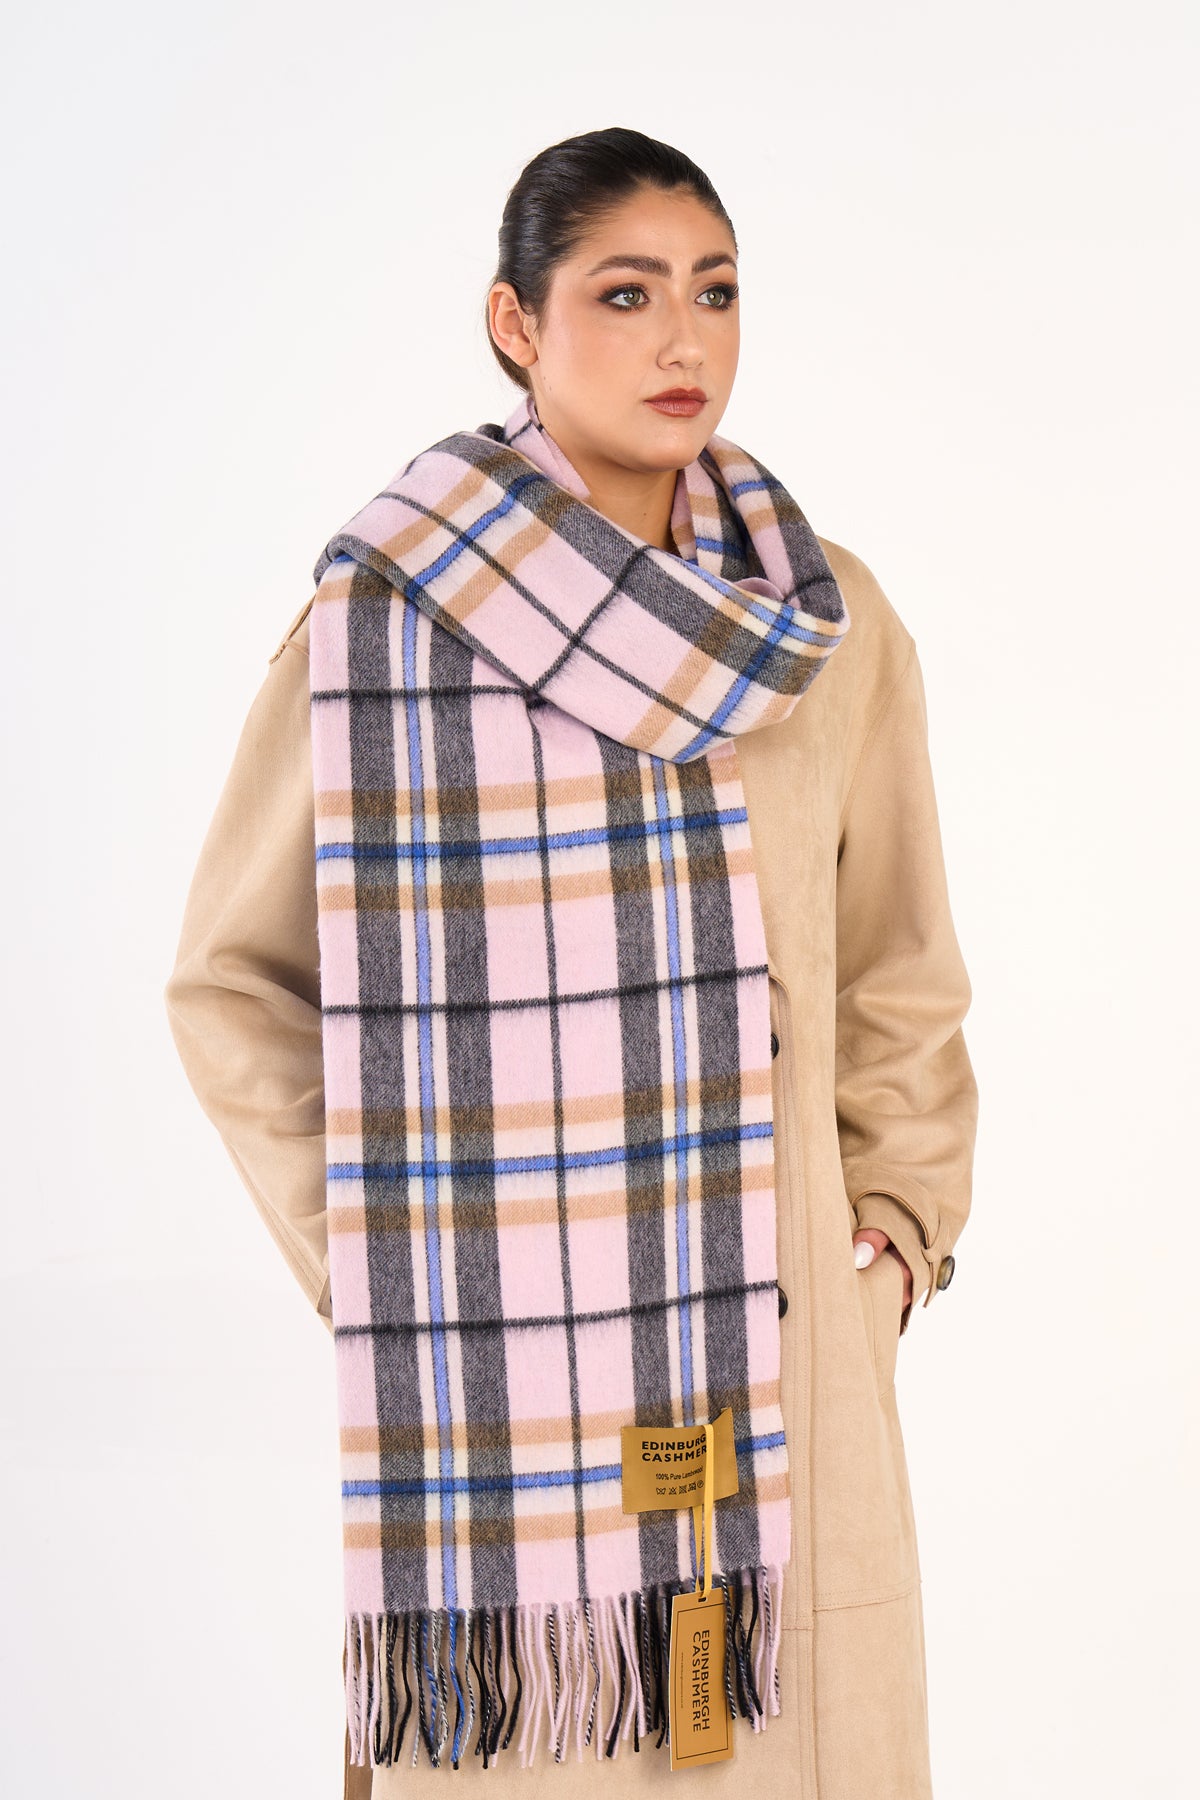 100% Pure Lambswool Oversized Scarf/Wrap Thomson Camel/Light Grey 25